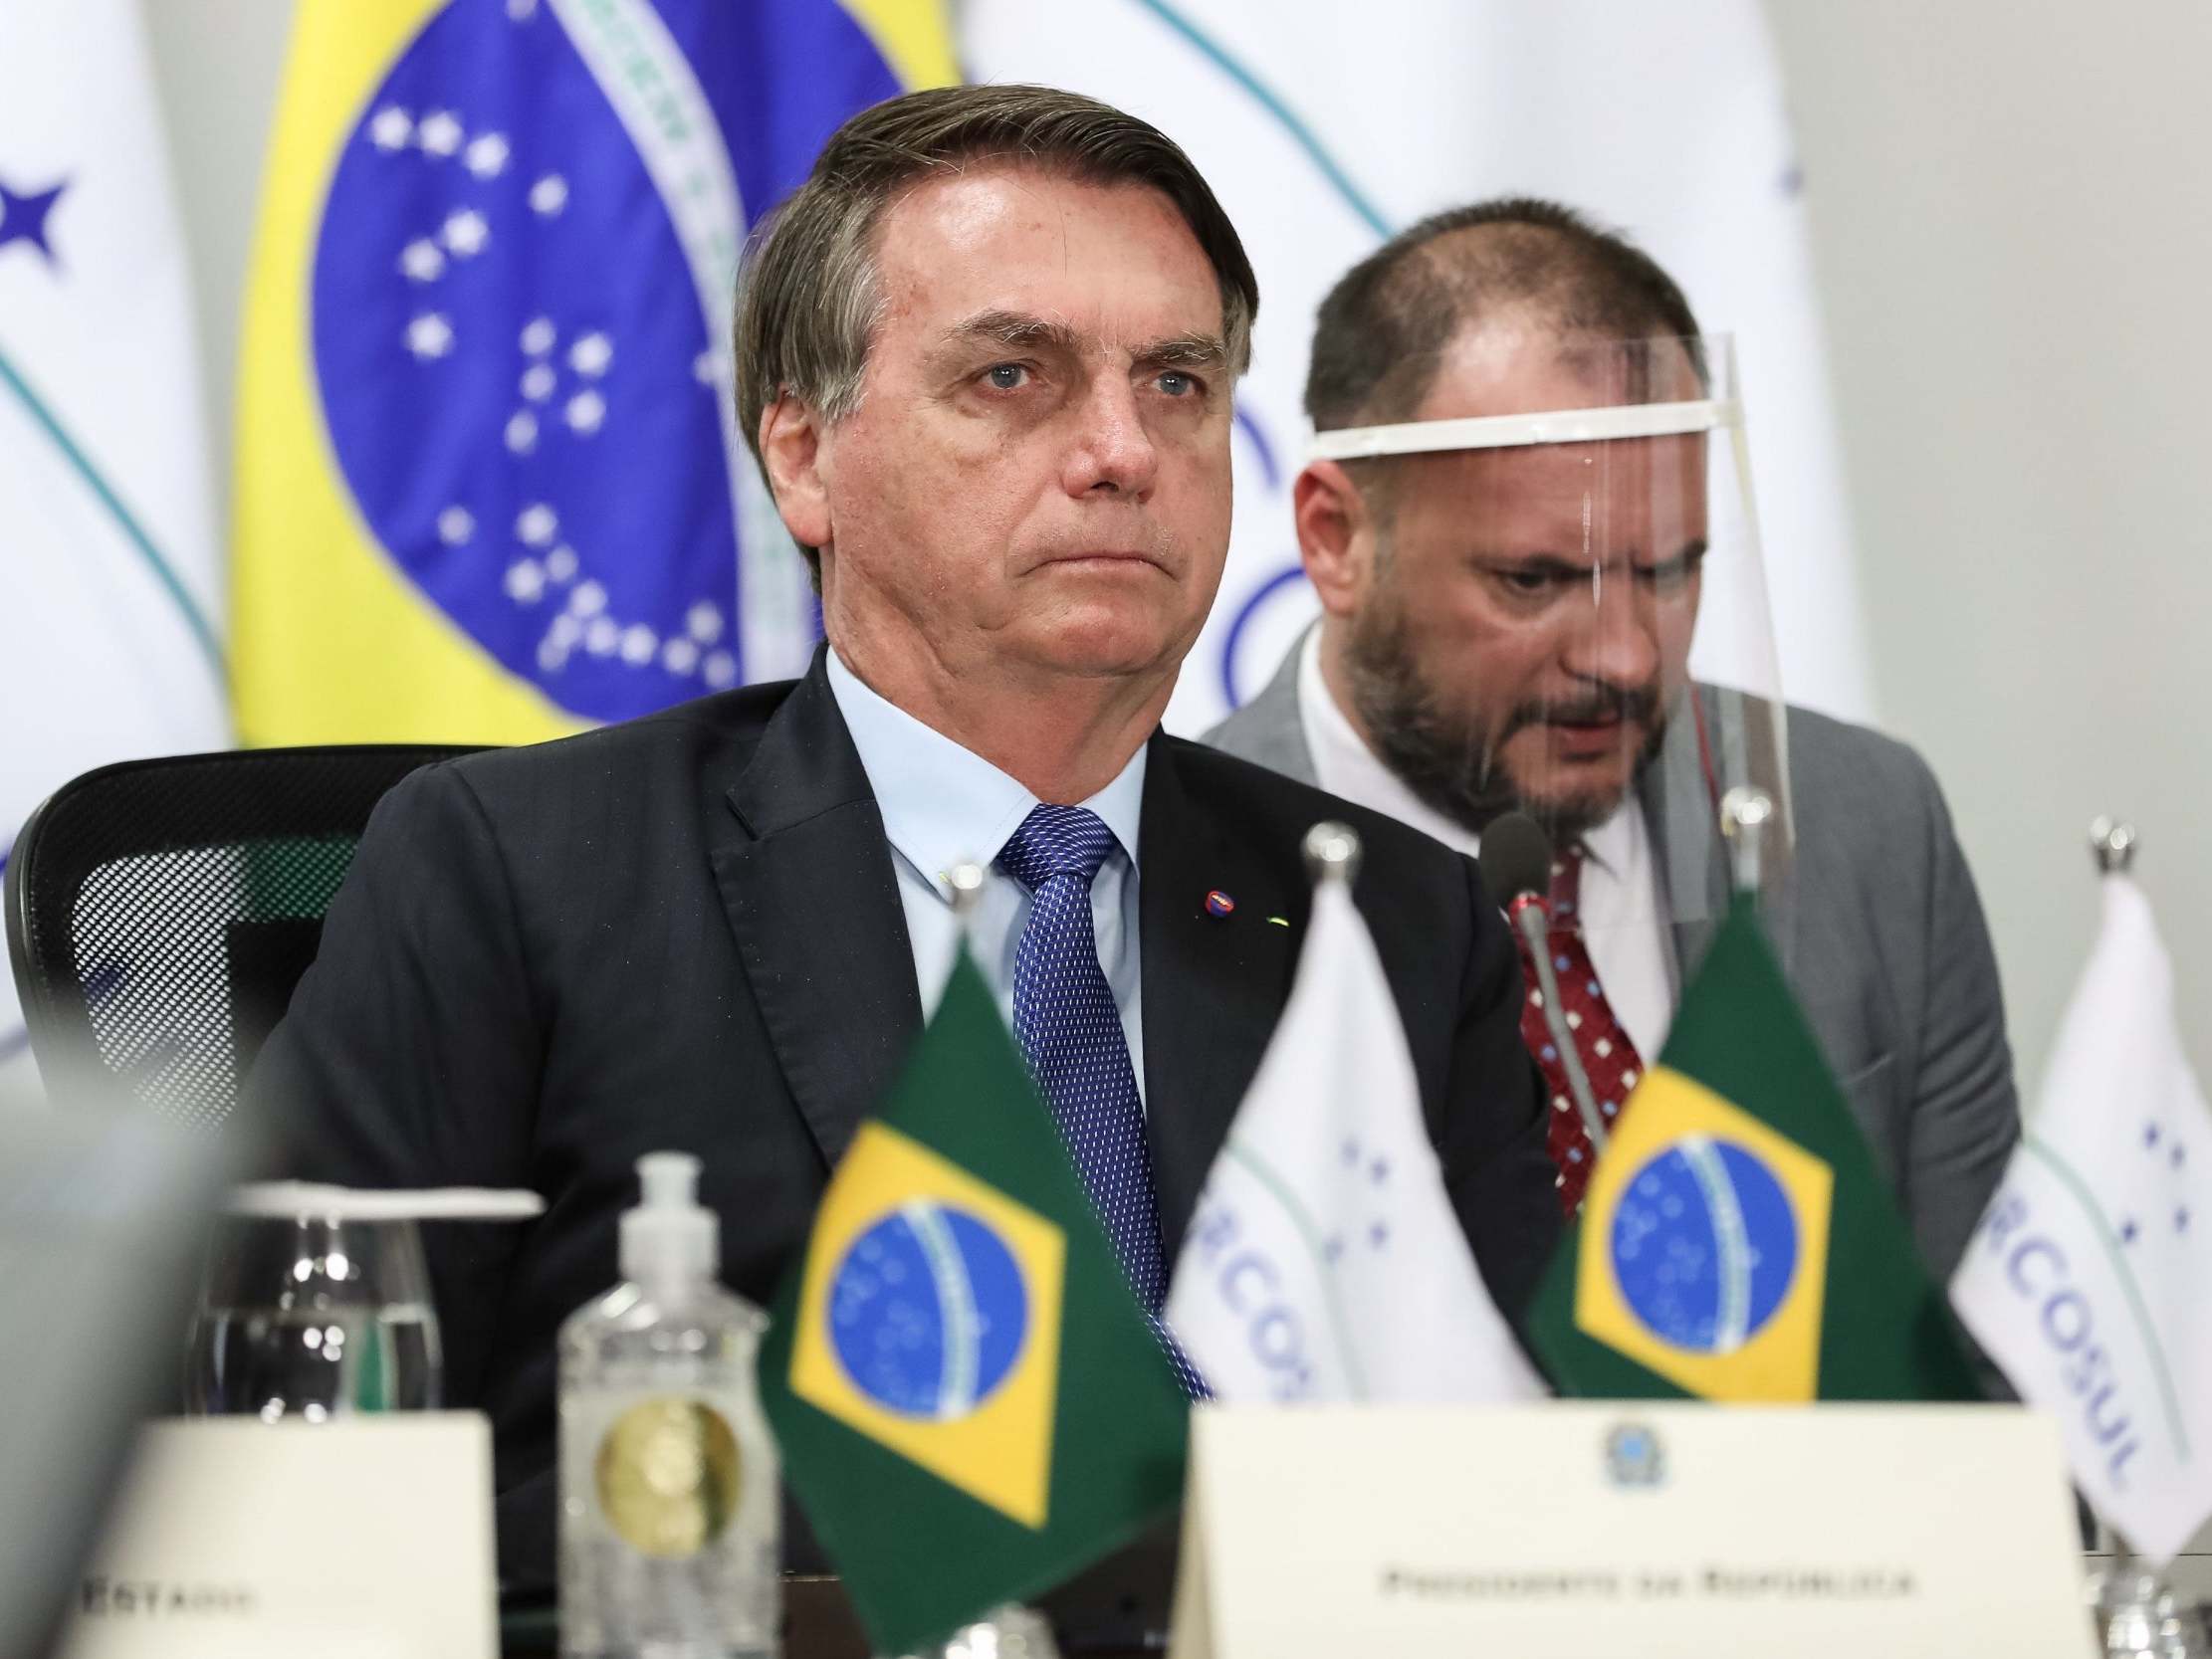 Brazil's conservatives have condemned the move as an attack on free speech